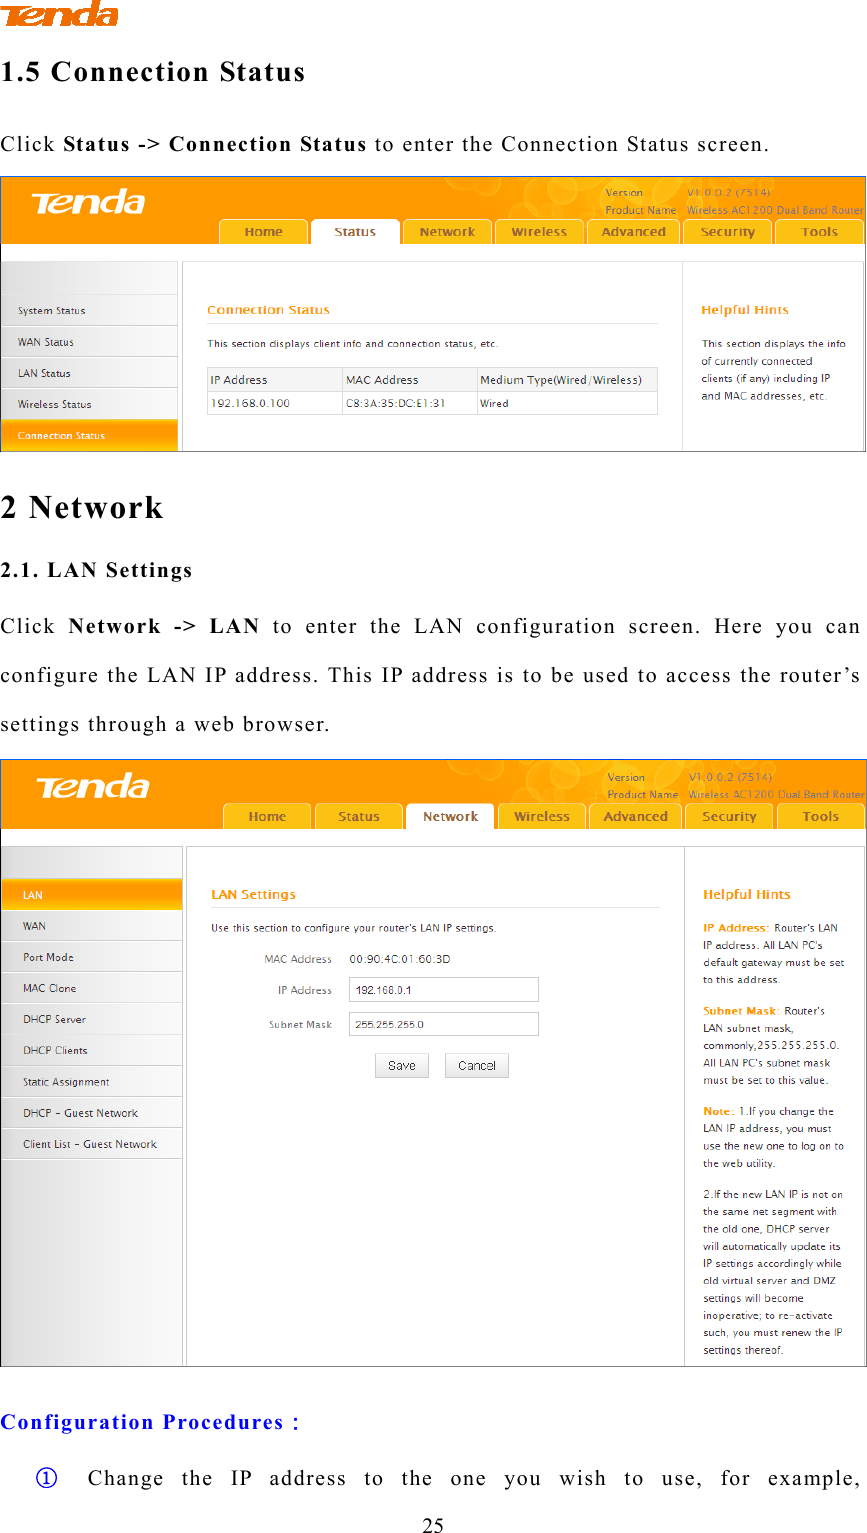                                 25 1.5 Connection Status Click Status -&gt; Connection Status to enter the Connection Status screen.  2 Network 2.1. LAN Settings Click  Network -&gt; LAN to enter the LAN configuration screen. Here you can configure the LAN IP address. This IP address is to be used to access the router’s settings through a web browser.  Configuration Procedures： ① Change the IP address to the one you wish to use, for example, 